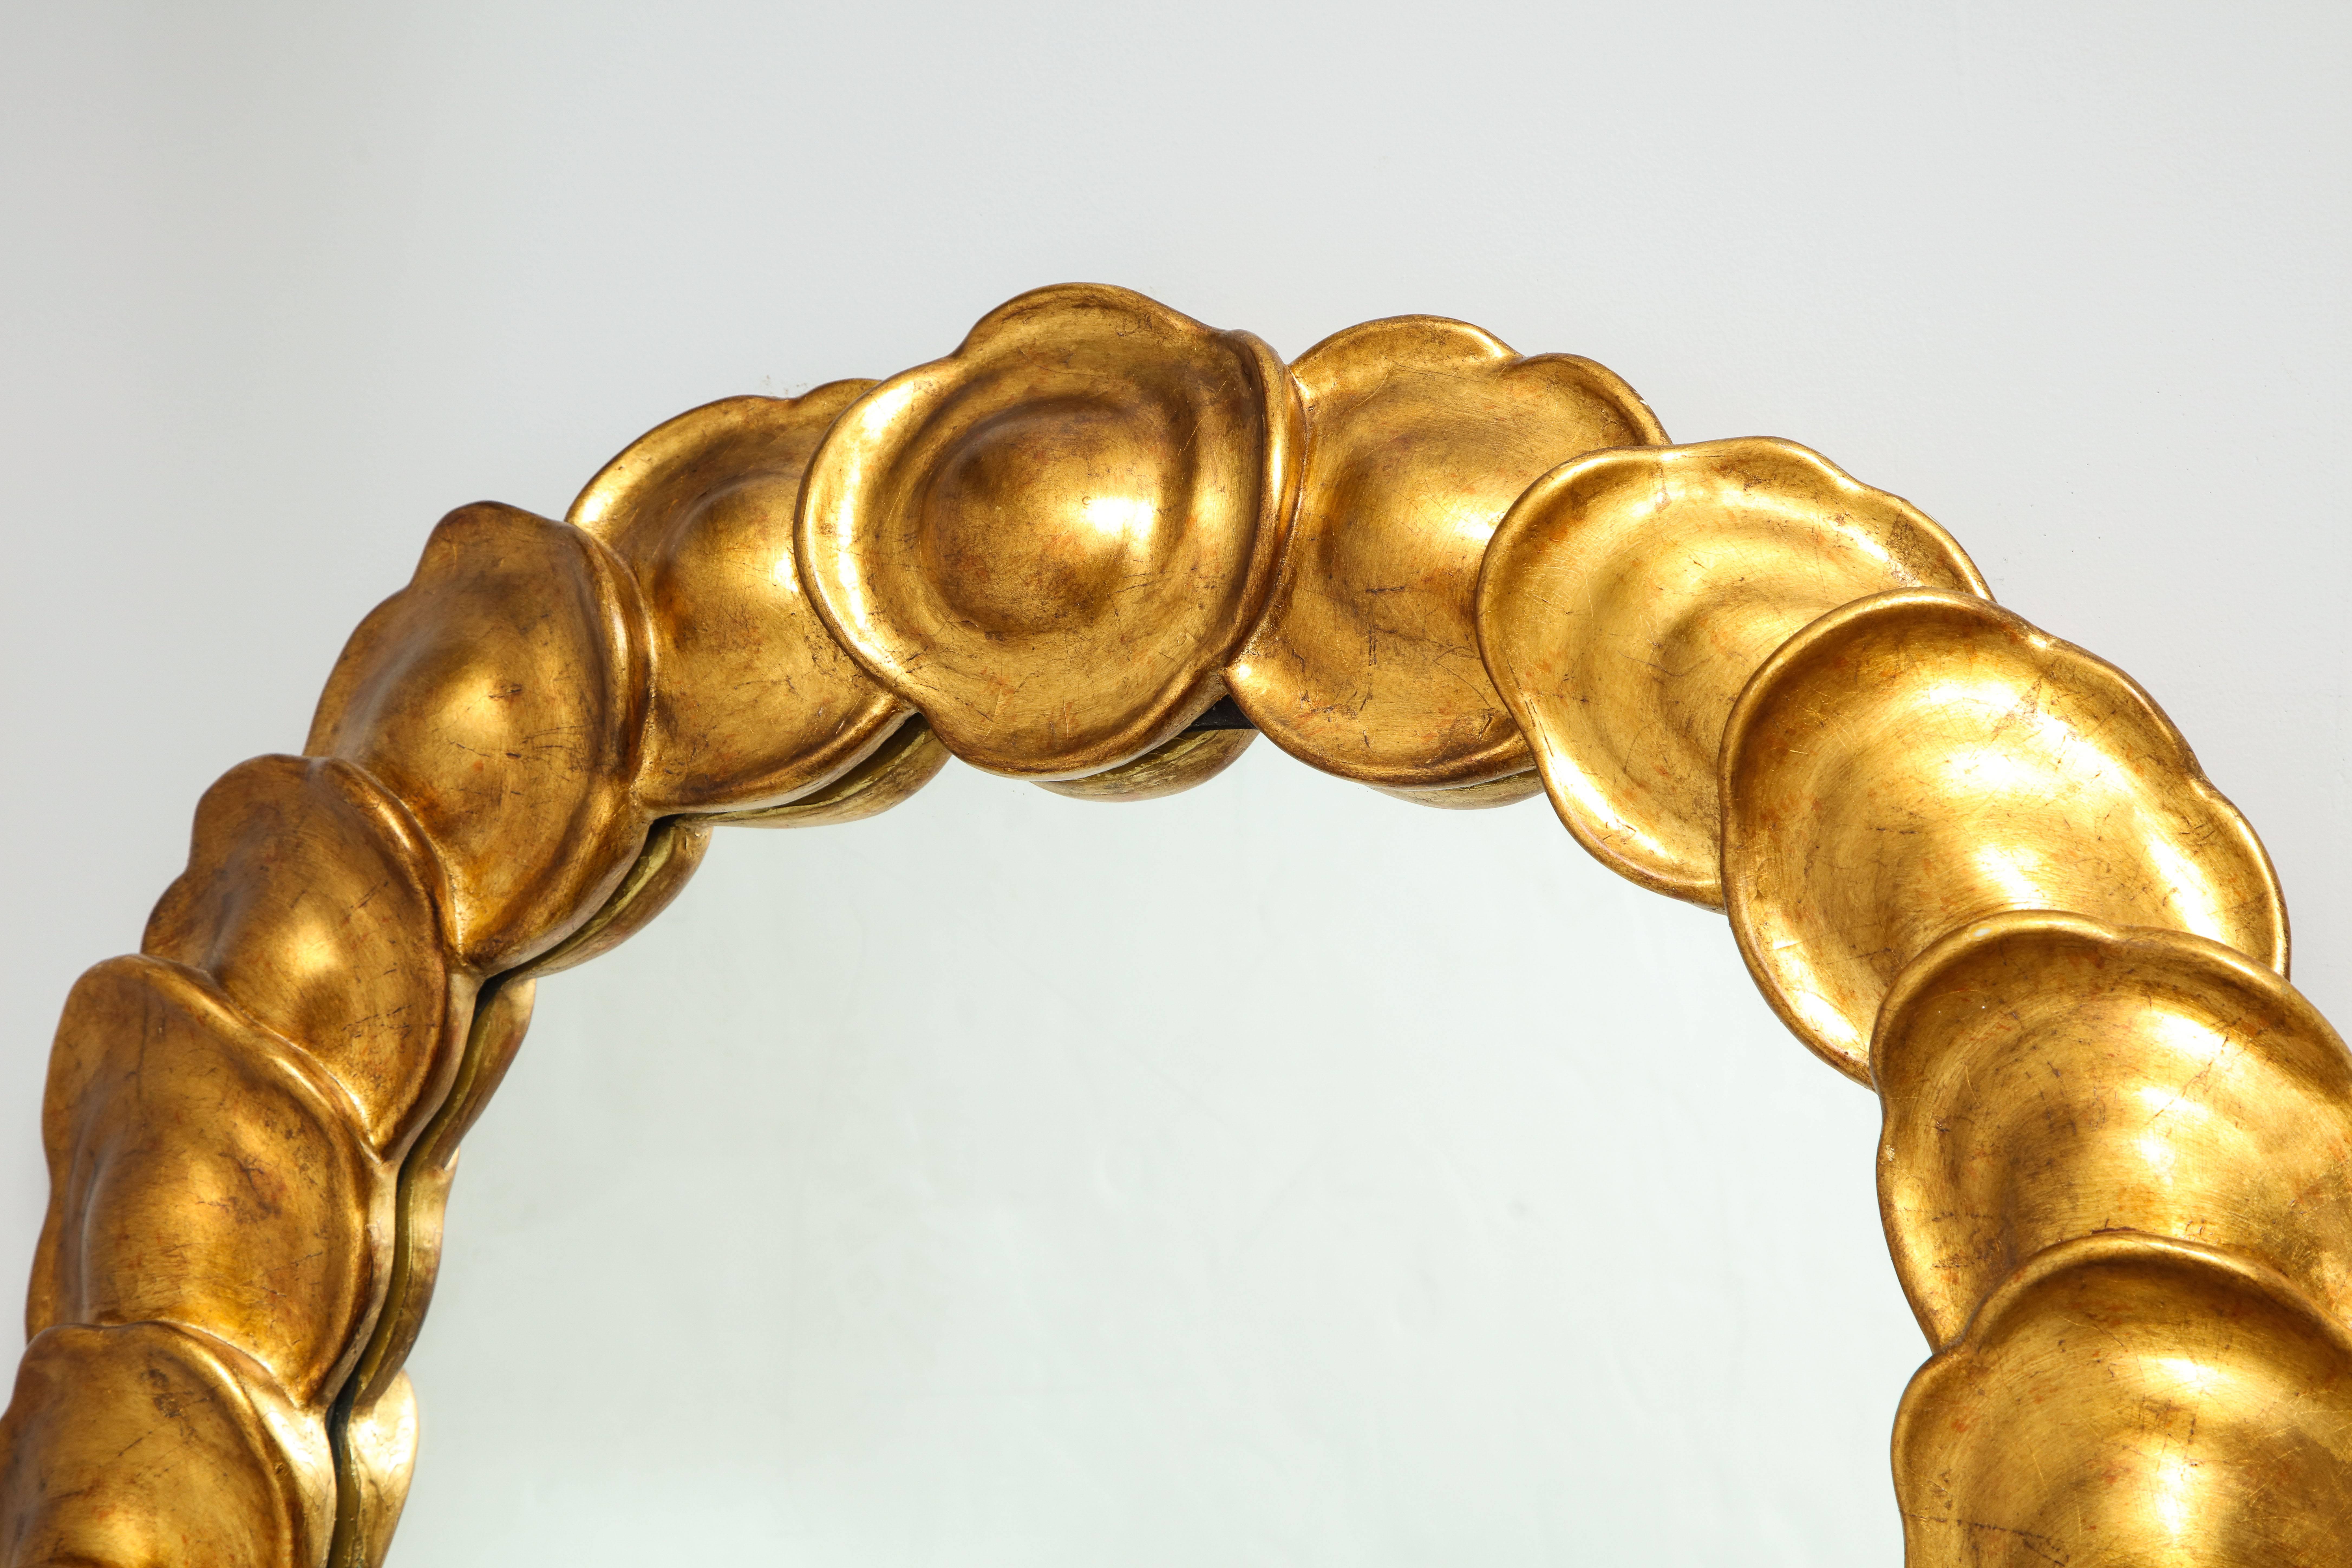 Mid-20th Century Italian Modernist Gilded and Carved Mirror with Overlapping Disc Design